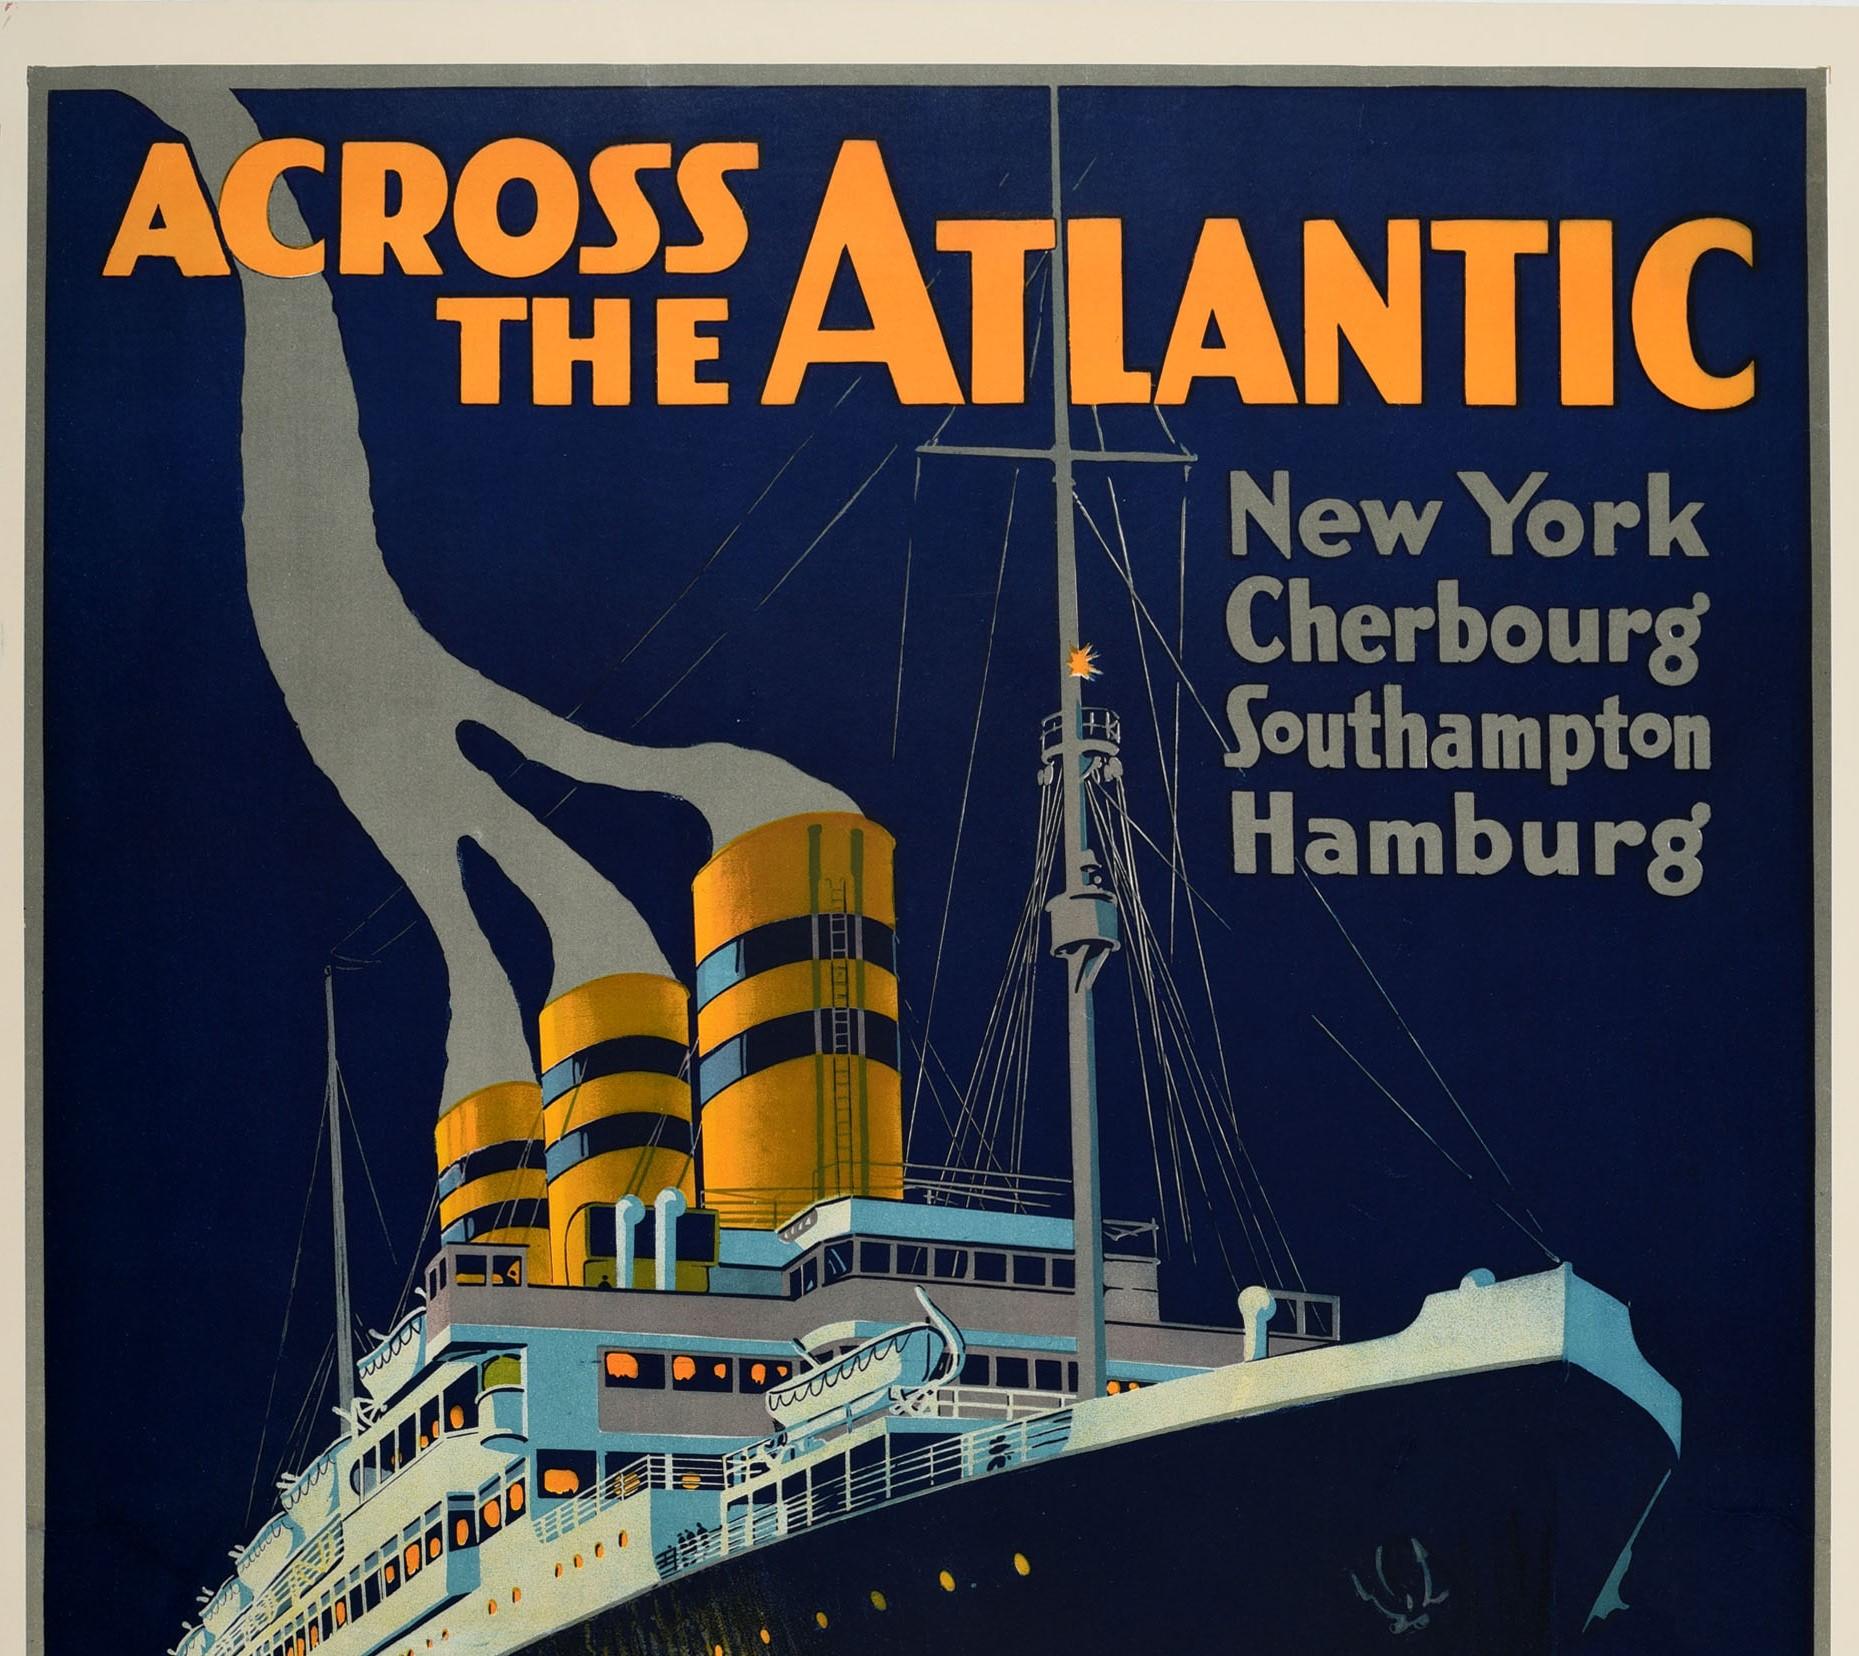 Original vintage cruise travel advertising poster - Across the Atlantic New York Cherbourg Southampton Hamburg United American Lines (Harriman Line) Joint service with Hamburg American Line (HAPAG) - featuring a stunning design by Fred J. Hoertz